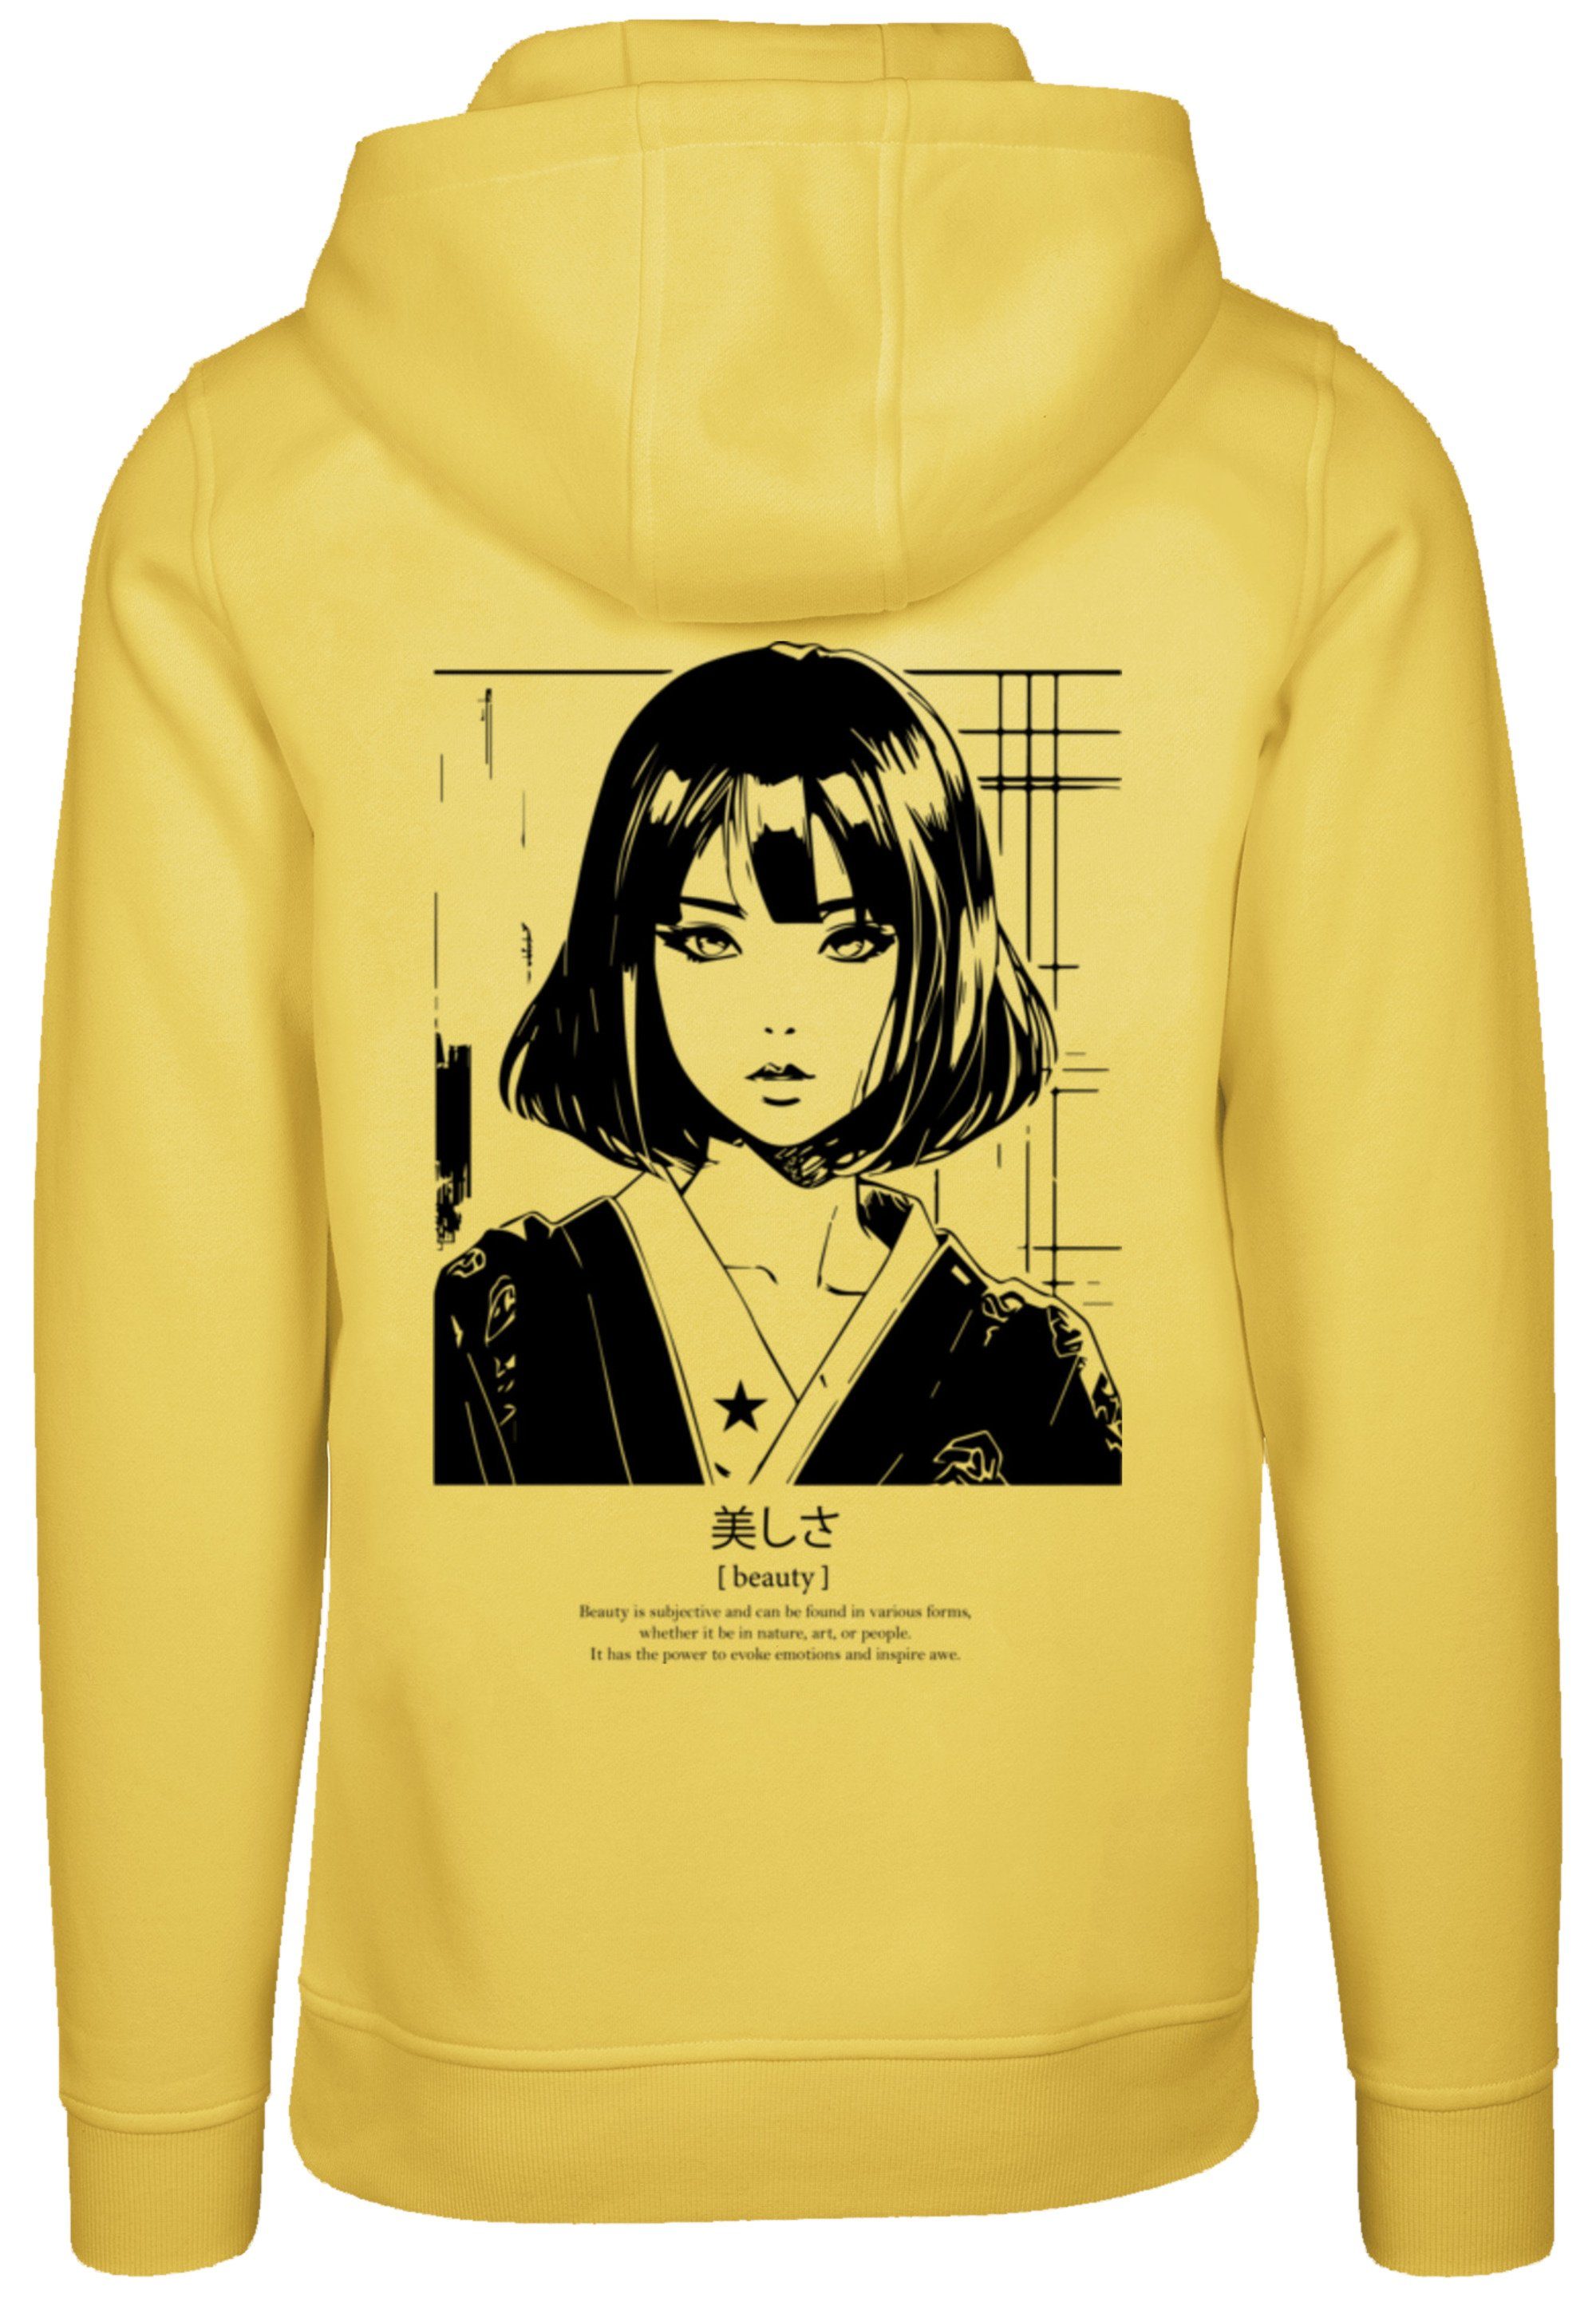 Kapuzenpullover Beauty Warm, taxi Hoodie, Girl Bequem F4NT4STIC Anime yellow